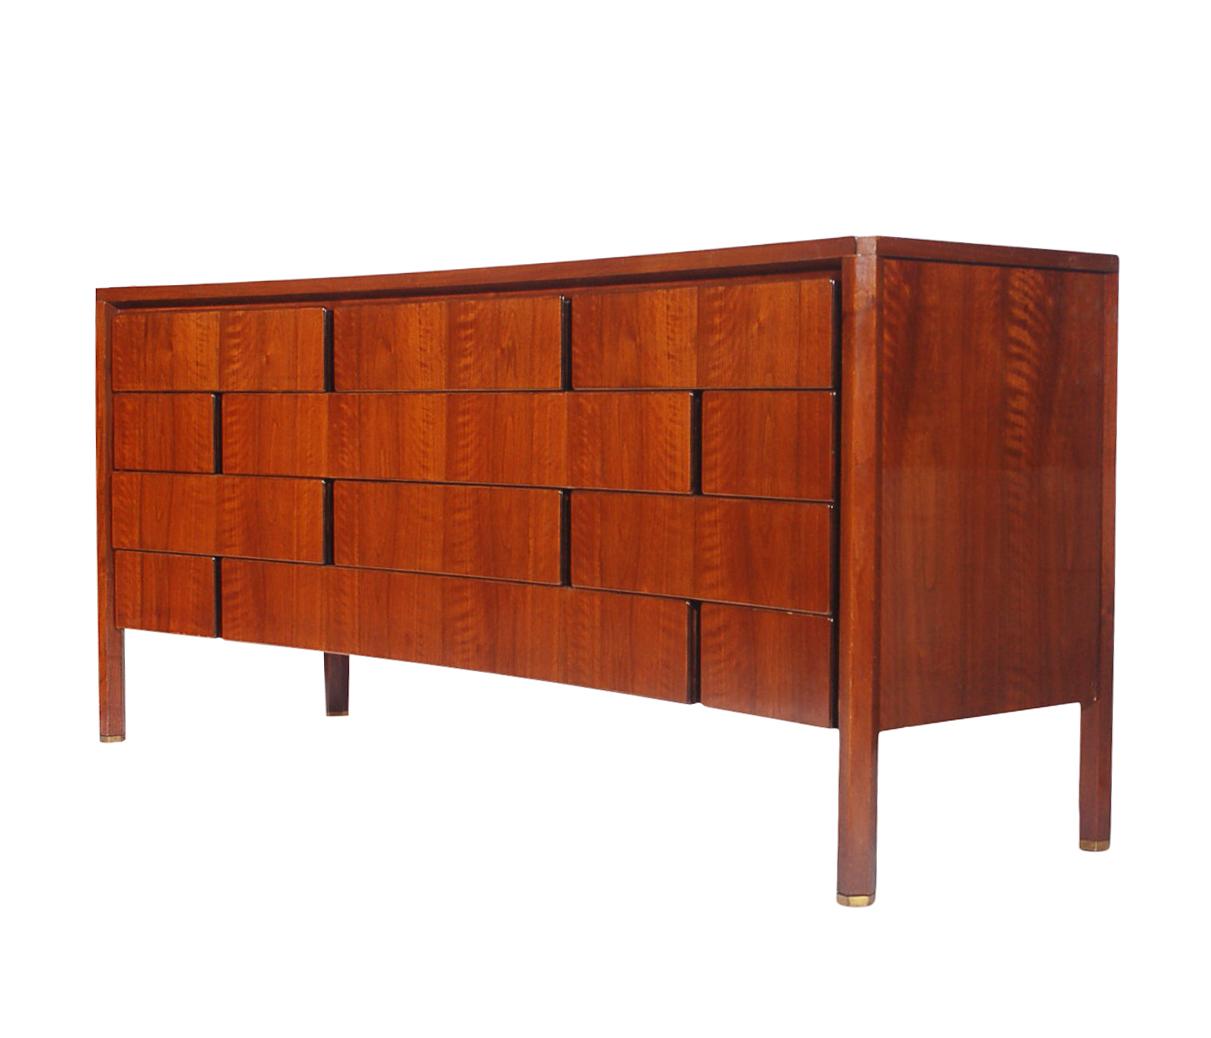 A stunning and incredibly built complete bedroom set designed by Edmond Spence in Sweden. Incredible curved fronts with unique drawer layout. It features solid wood construction with gorgeous walnut wood grain. Hexagonal legs with brass end caps. In